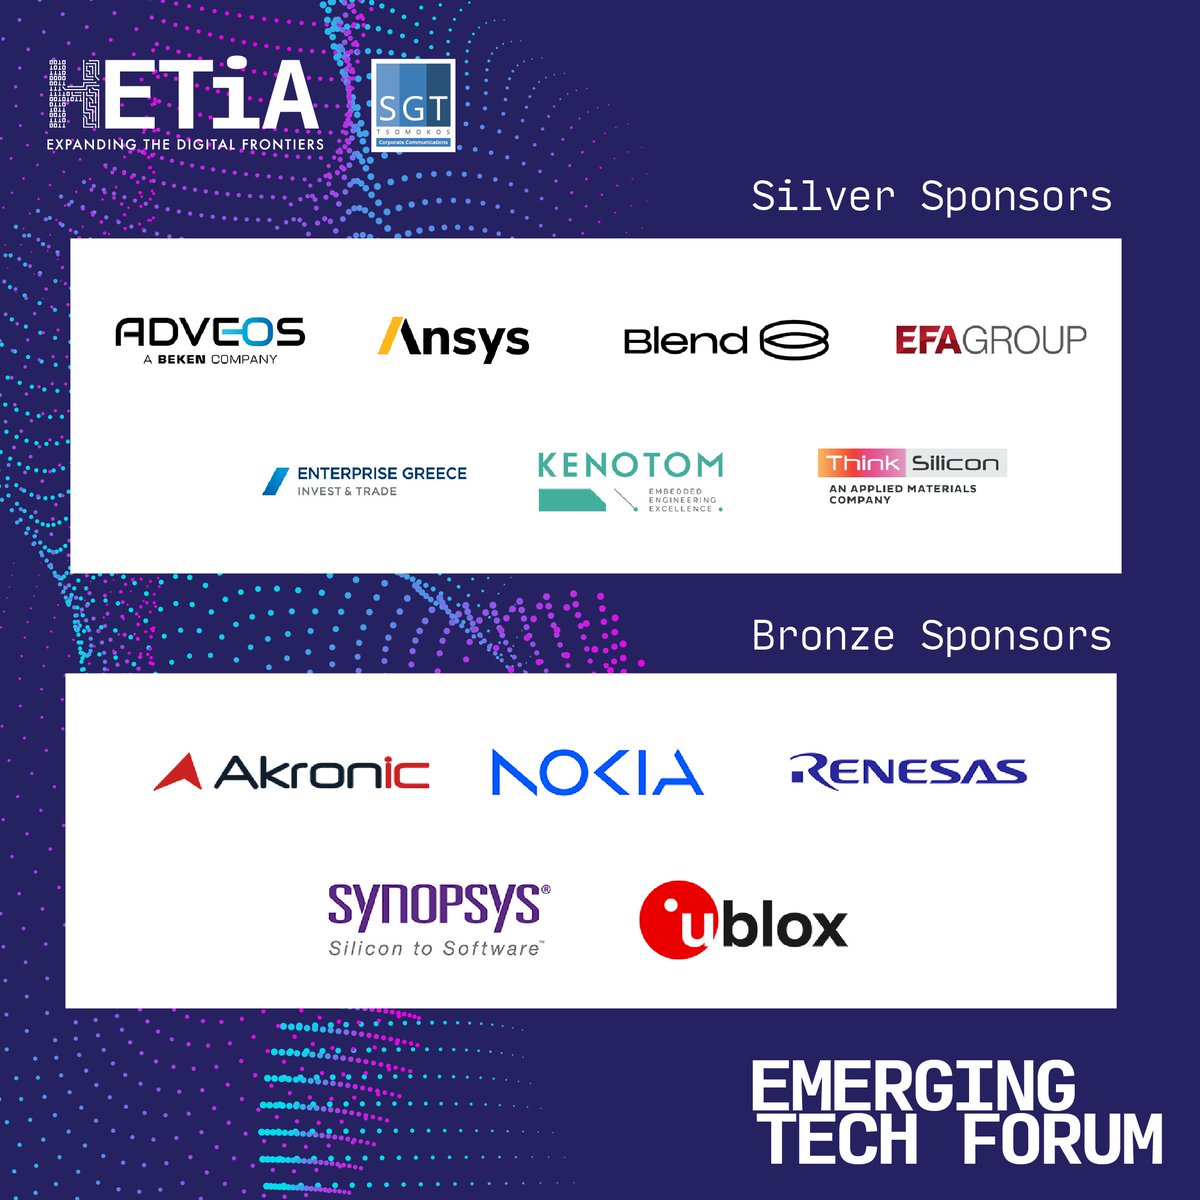 🌟 Big thanks to our Silver and Bronze sponsors! Your support elevates the Emerging Tech Forum. 🚀✨

#SponsorAppreciation #SilverSponsor #BronzeSponsor #EmergingTechForum #TechInnovation #GreeceTech #Hetia #Tsomokos